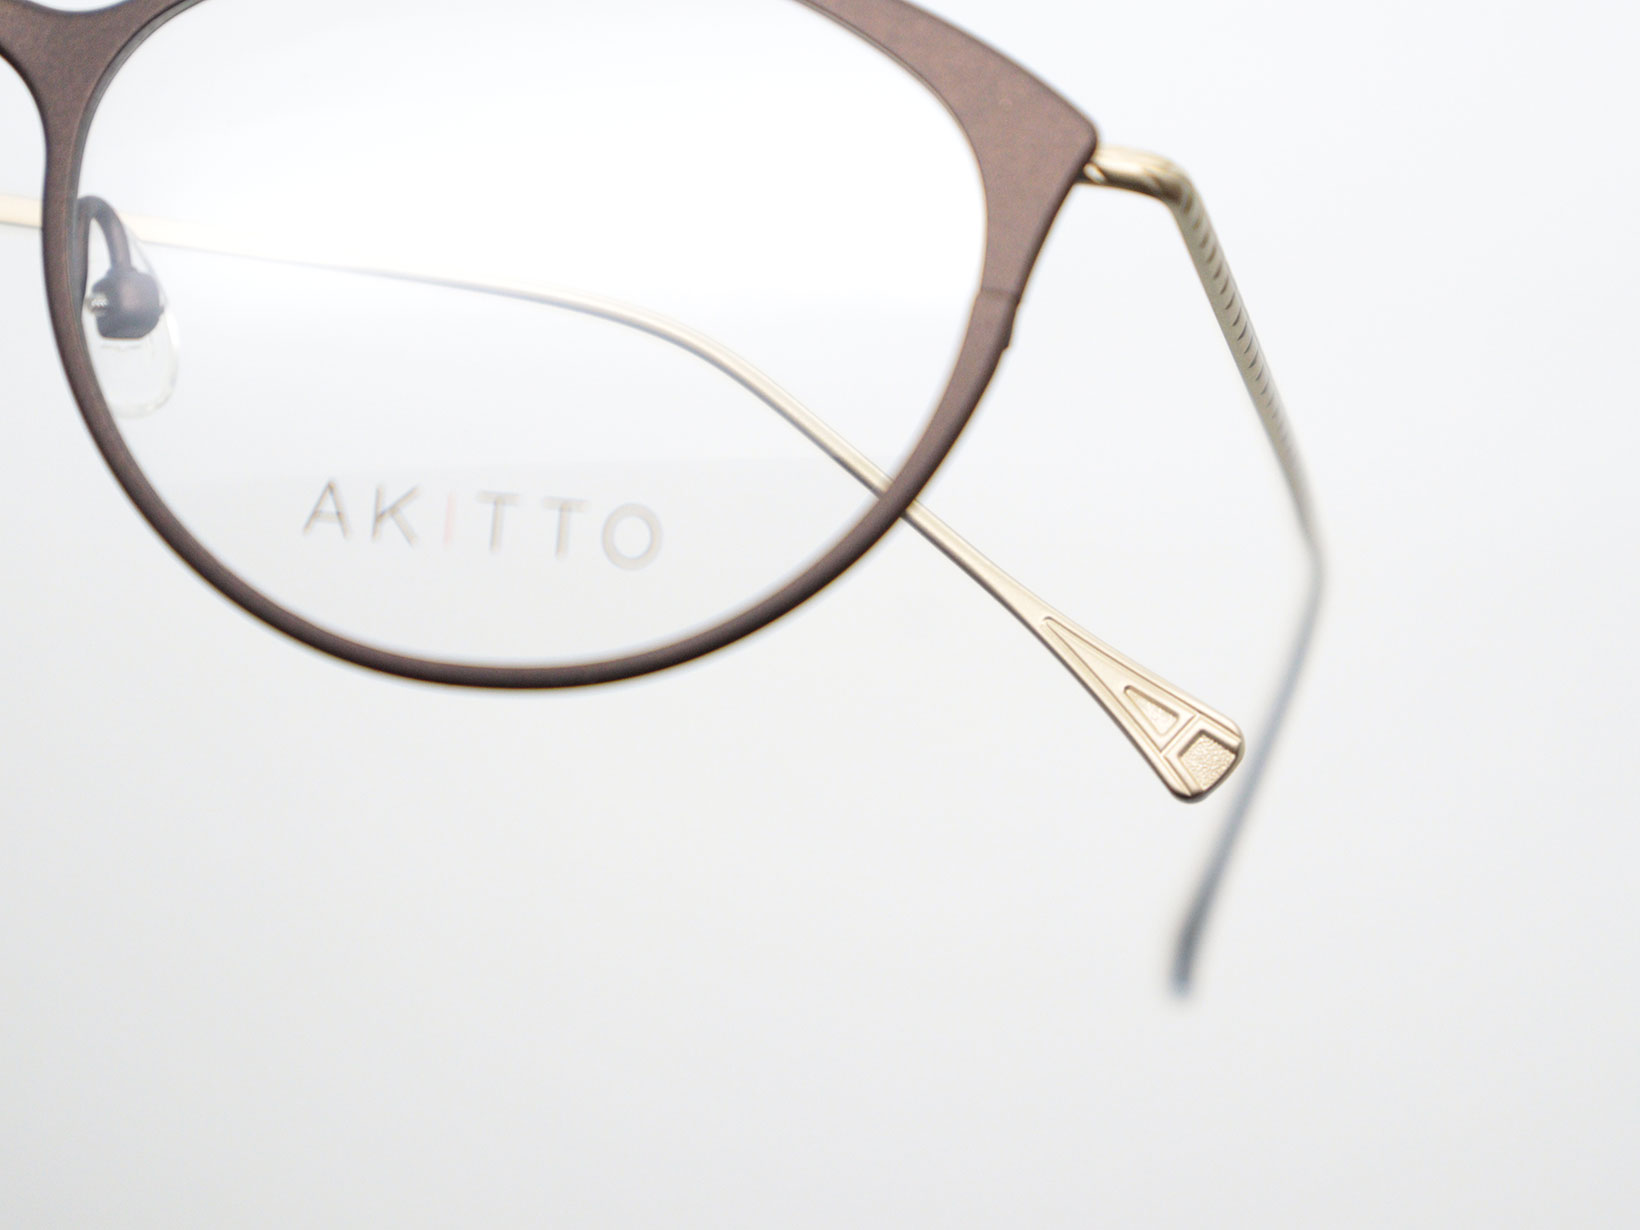 AKITTO 2022-3rd ive ive size:48□18 material:titanium price:￥46,200-(税込み)